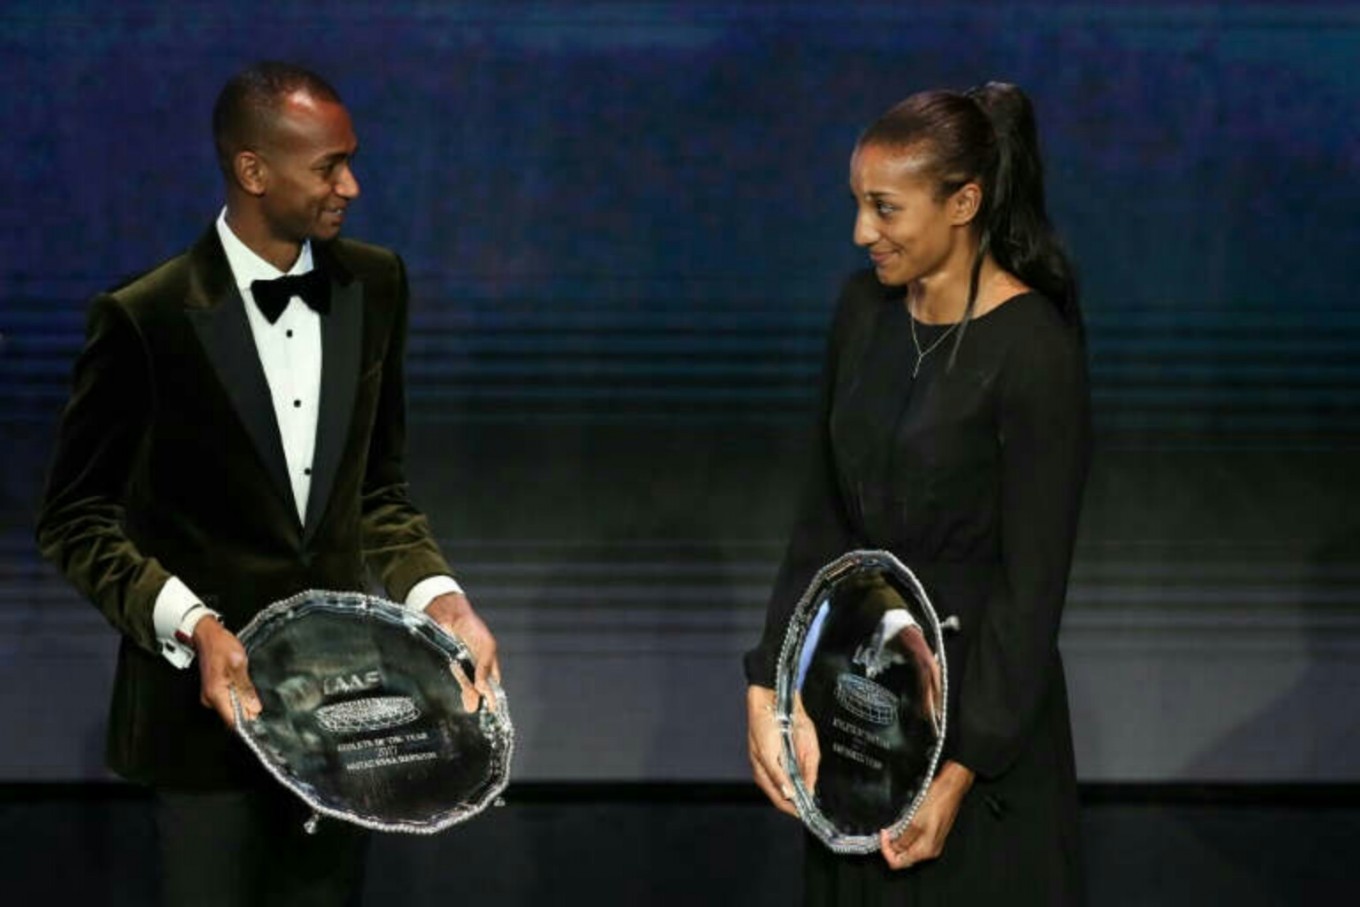 Barshim, Thiam, named athletes of the year - Sports - The ...